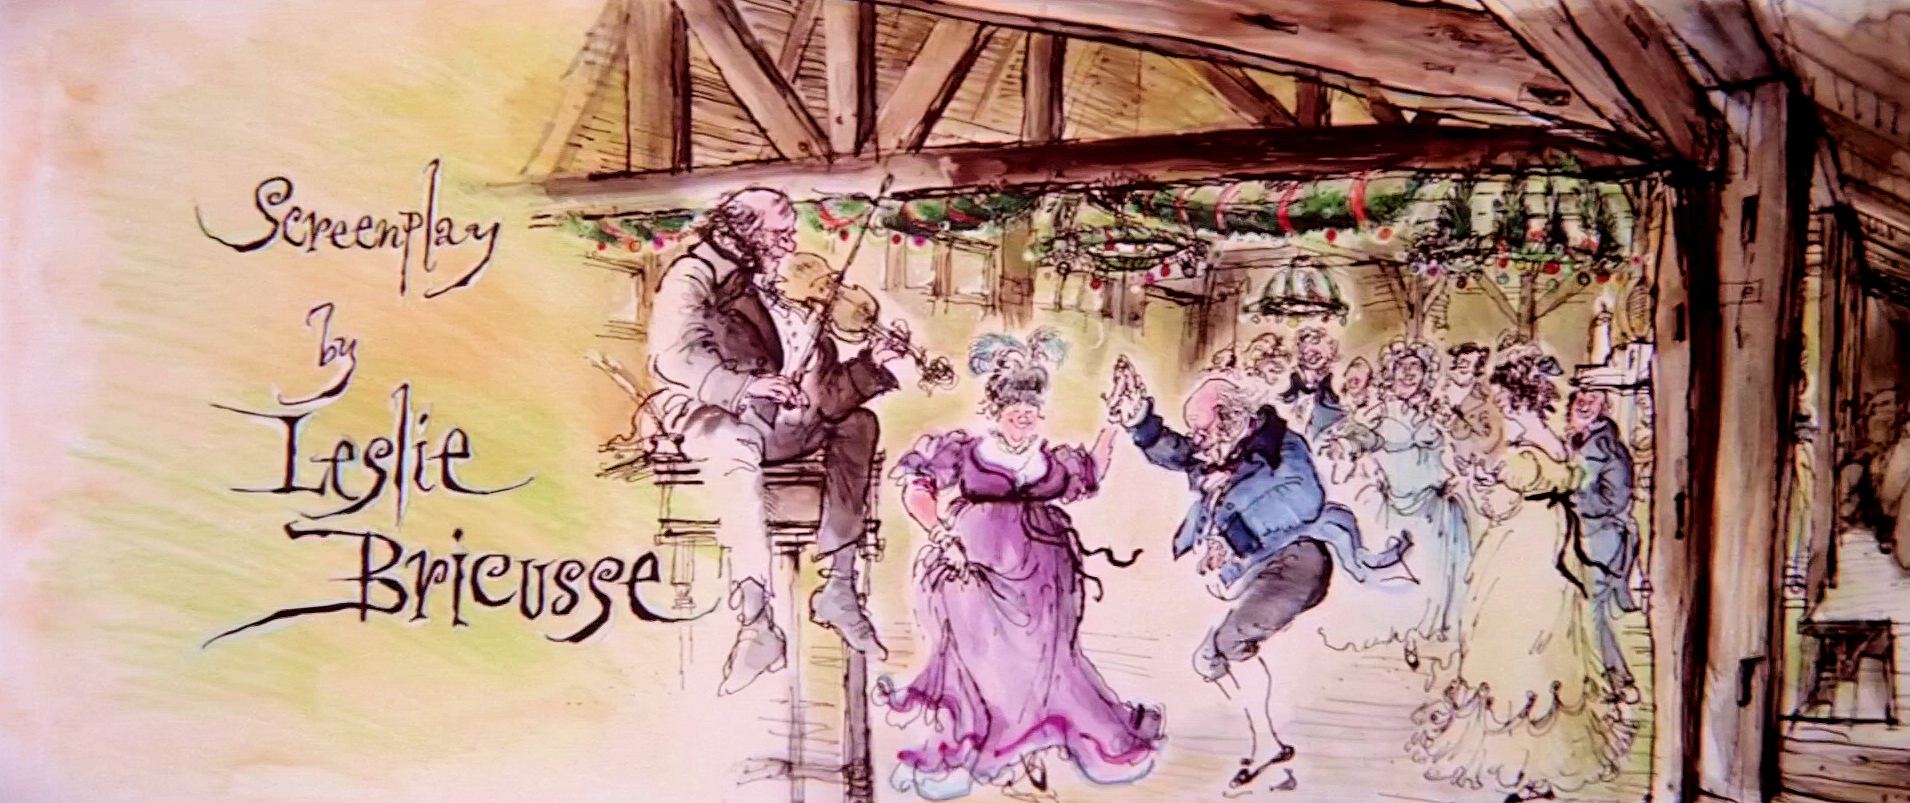 Main title from Scrooge (1970) (26). Screenplay by Leslie Bricusse